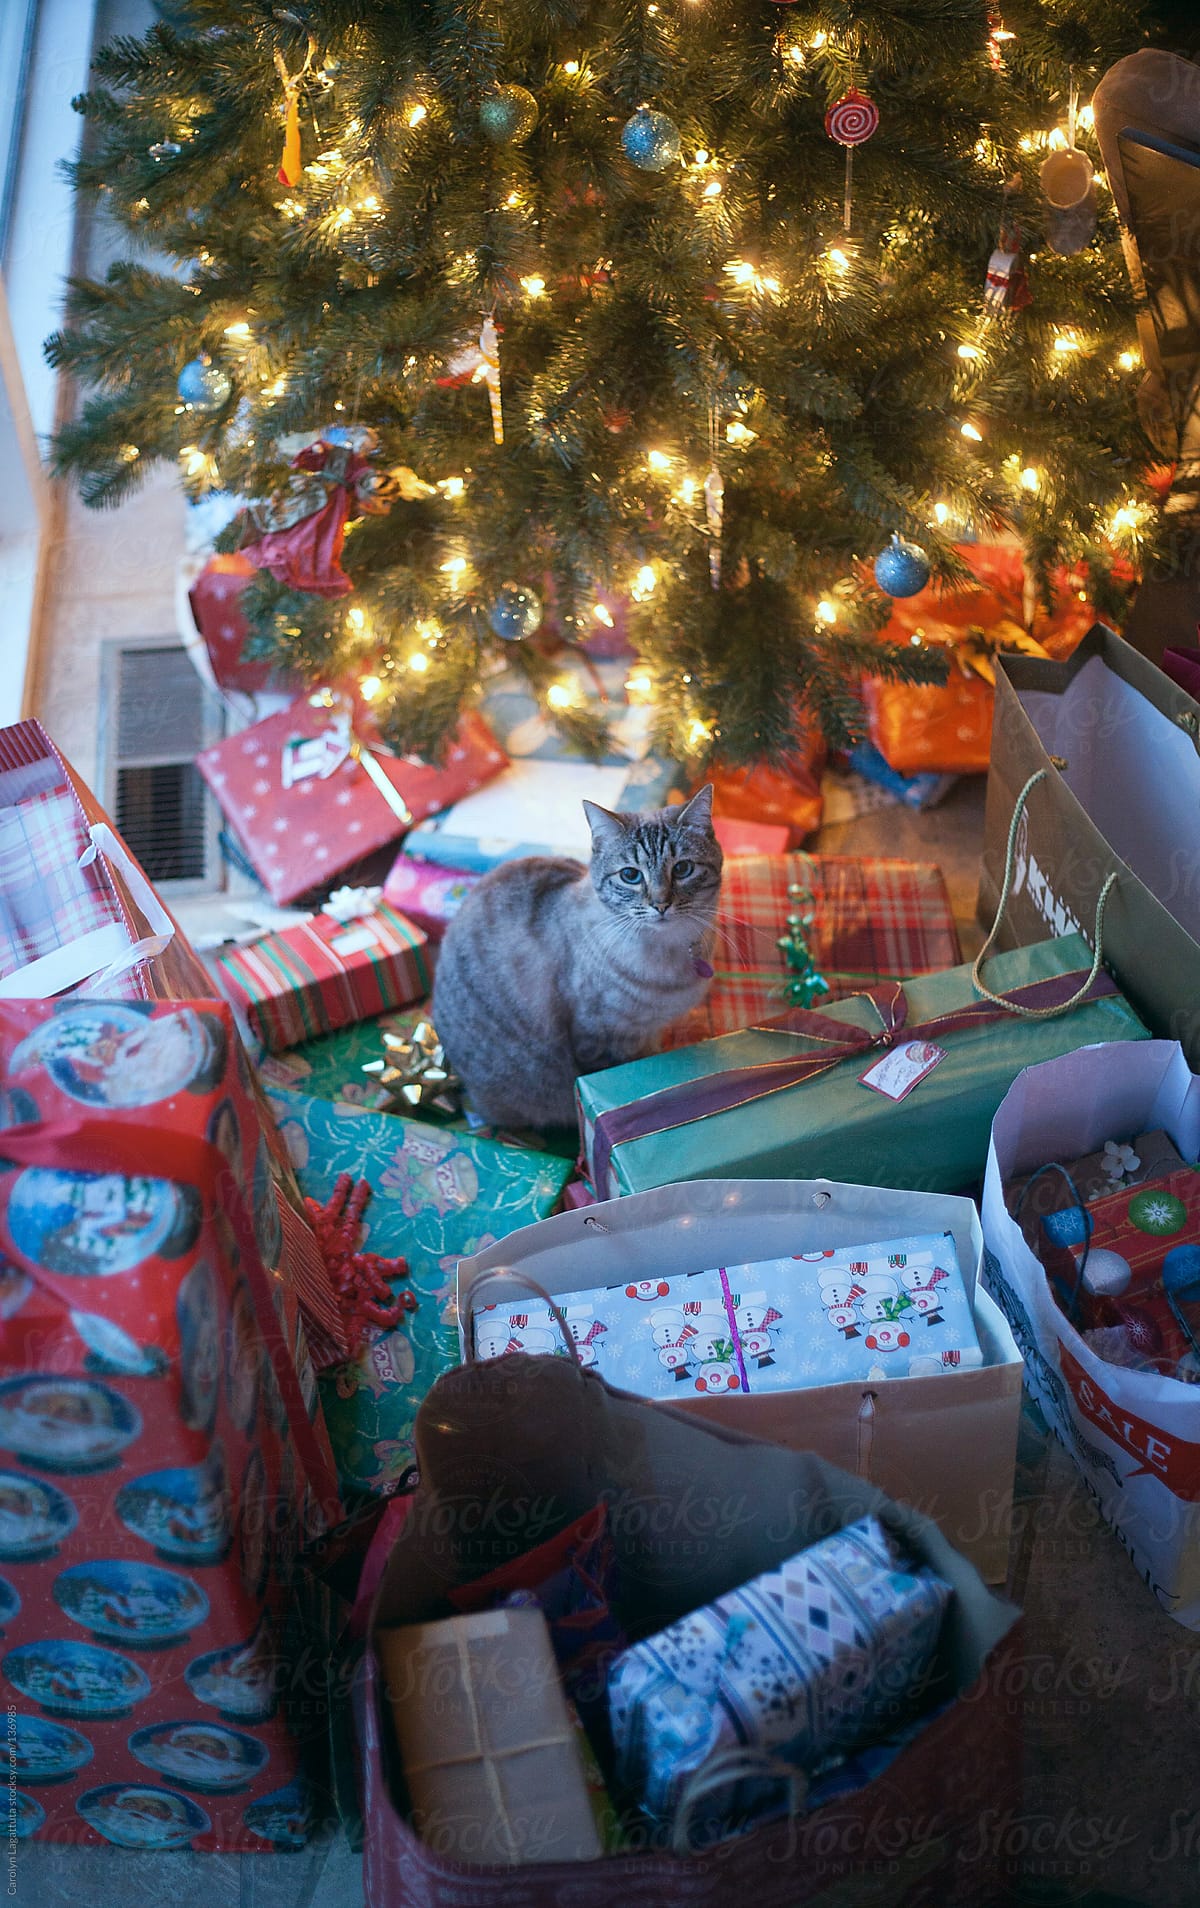 Siamese cat in the middle of many Christmas presents by the tree